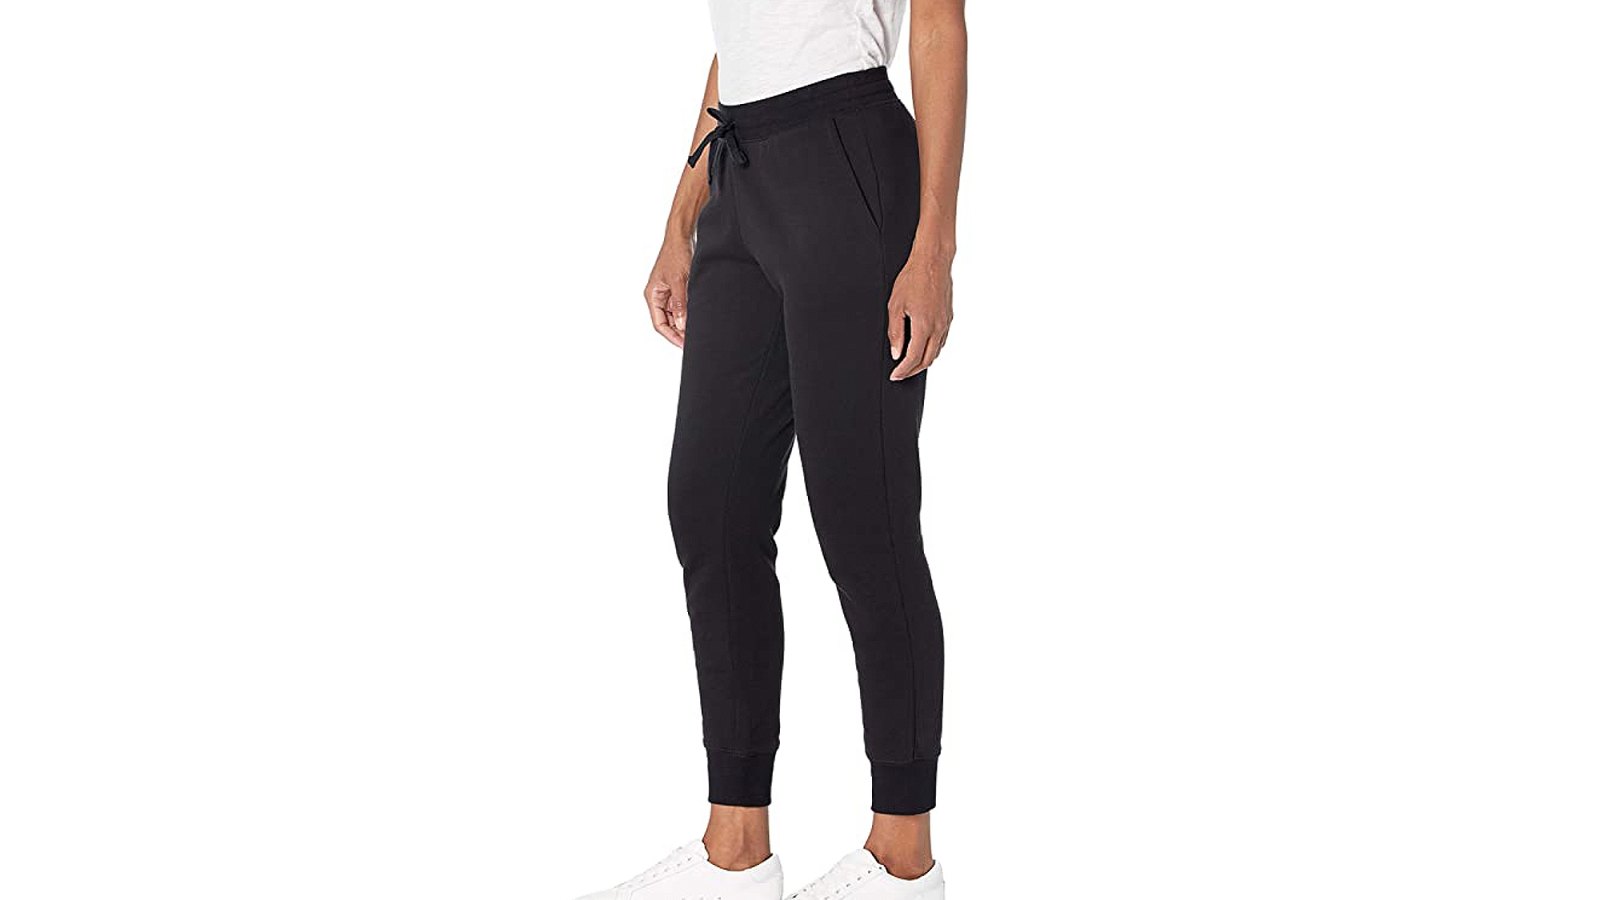 Amazon Essentials Women's Relaxed Fit French Terry Fleece Jogger Sweatpant